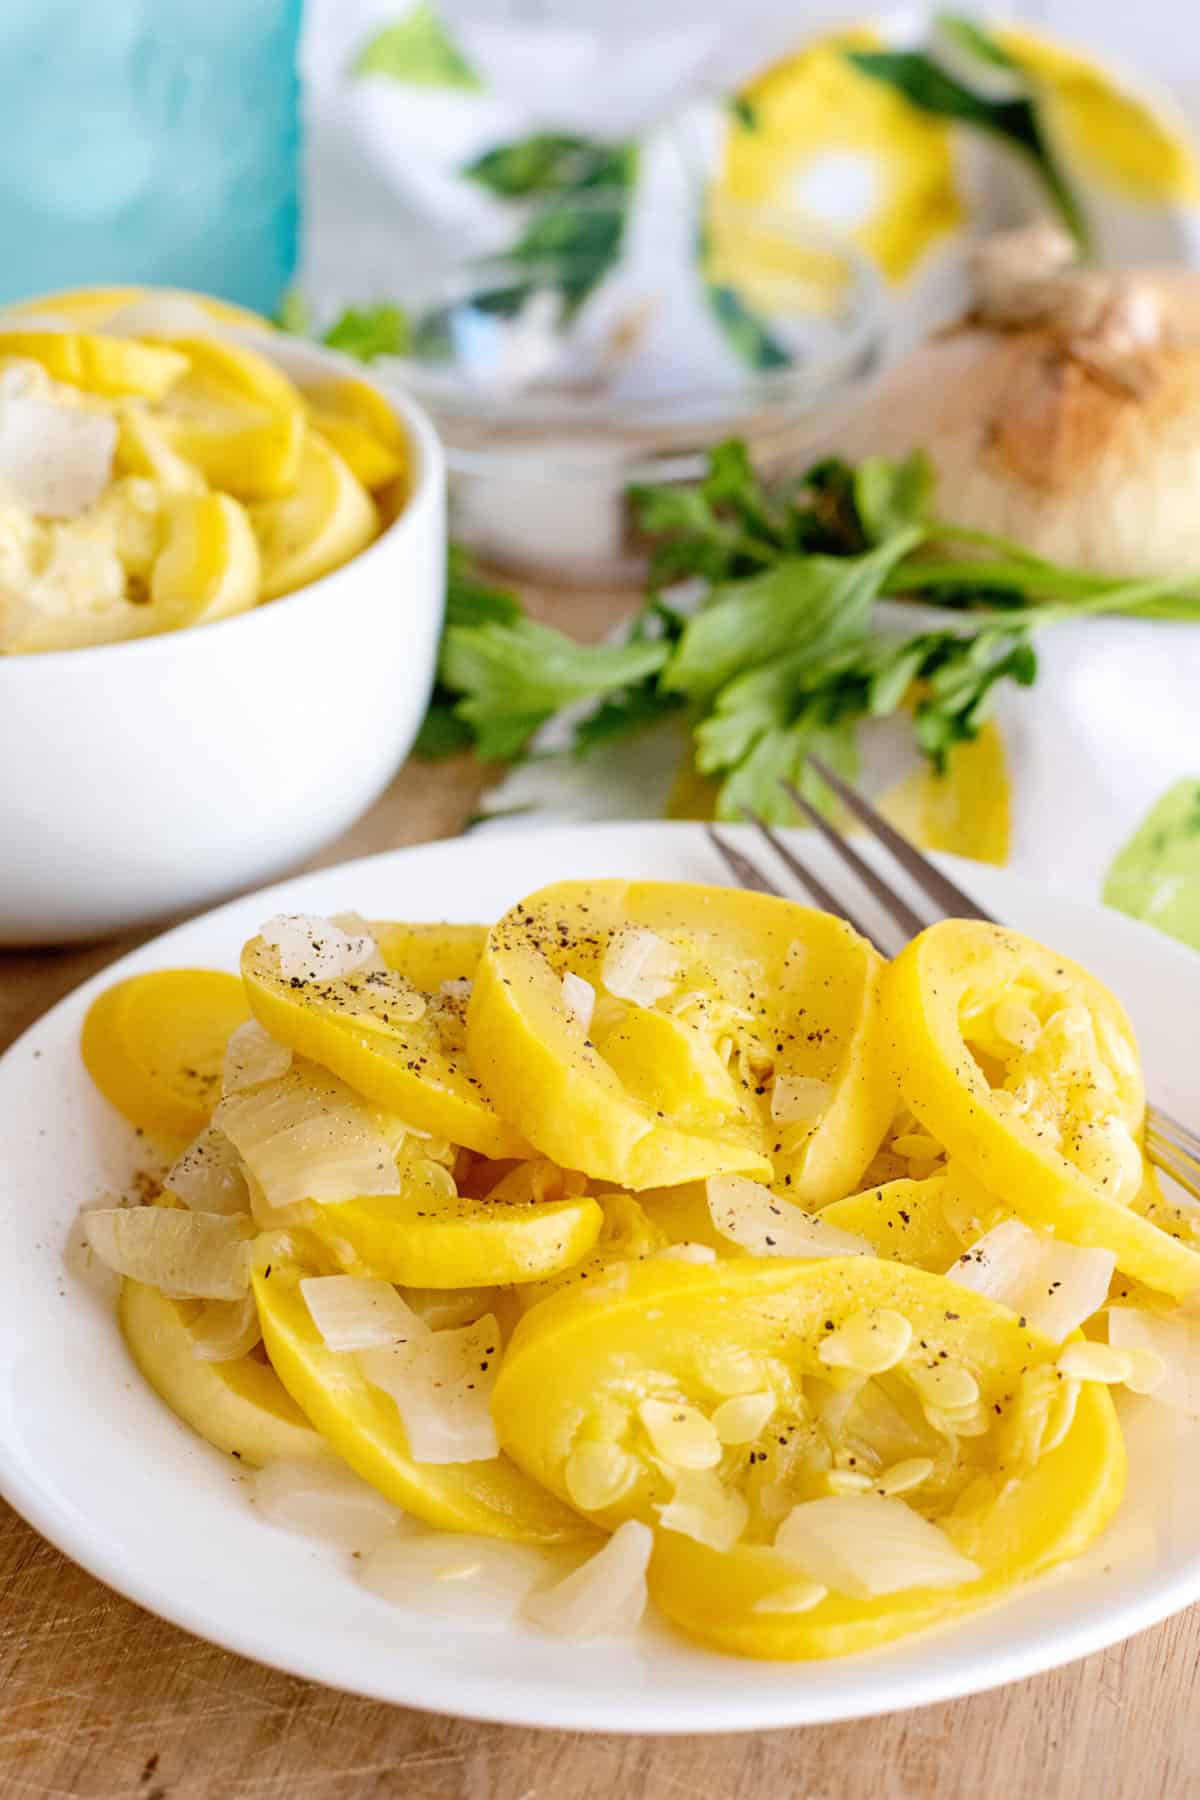 Plate of boiled squash with onions.